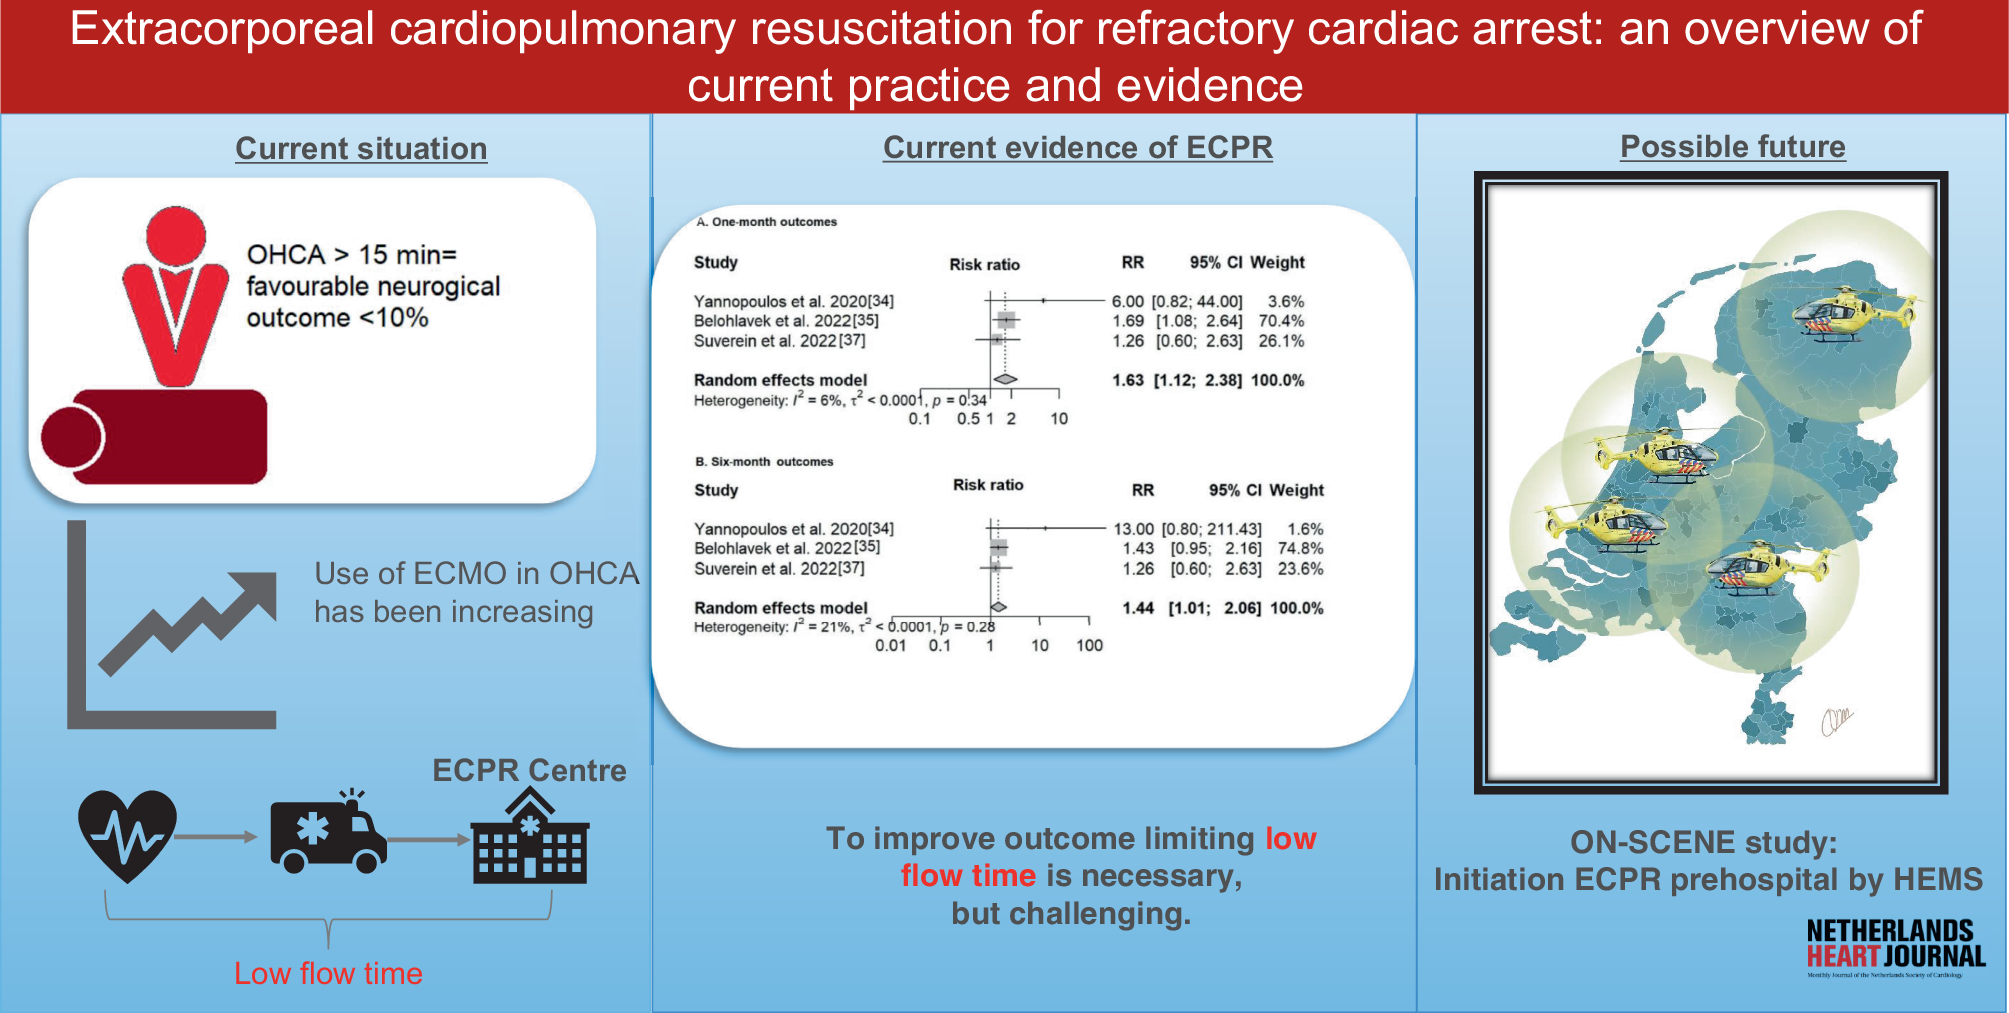 Extracorporeal cardiopulmonary resuscitation for refractory cardiac arrest: an overview of current practice and evidence